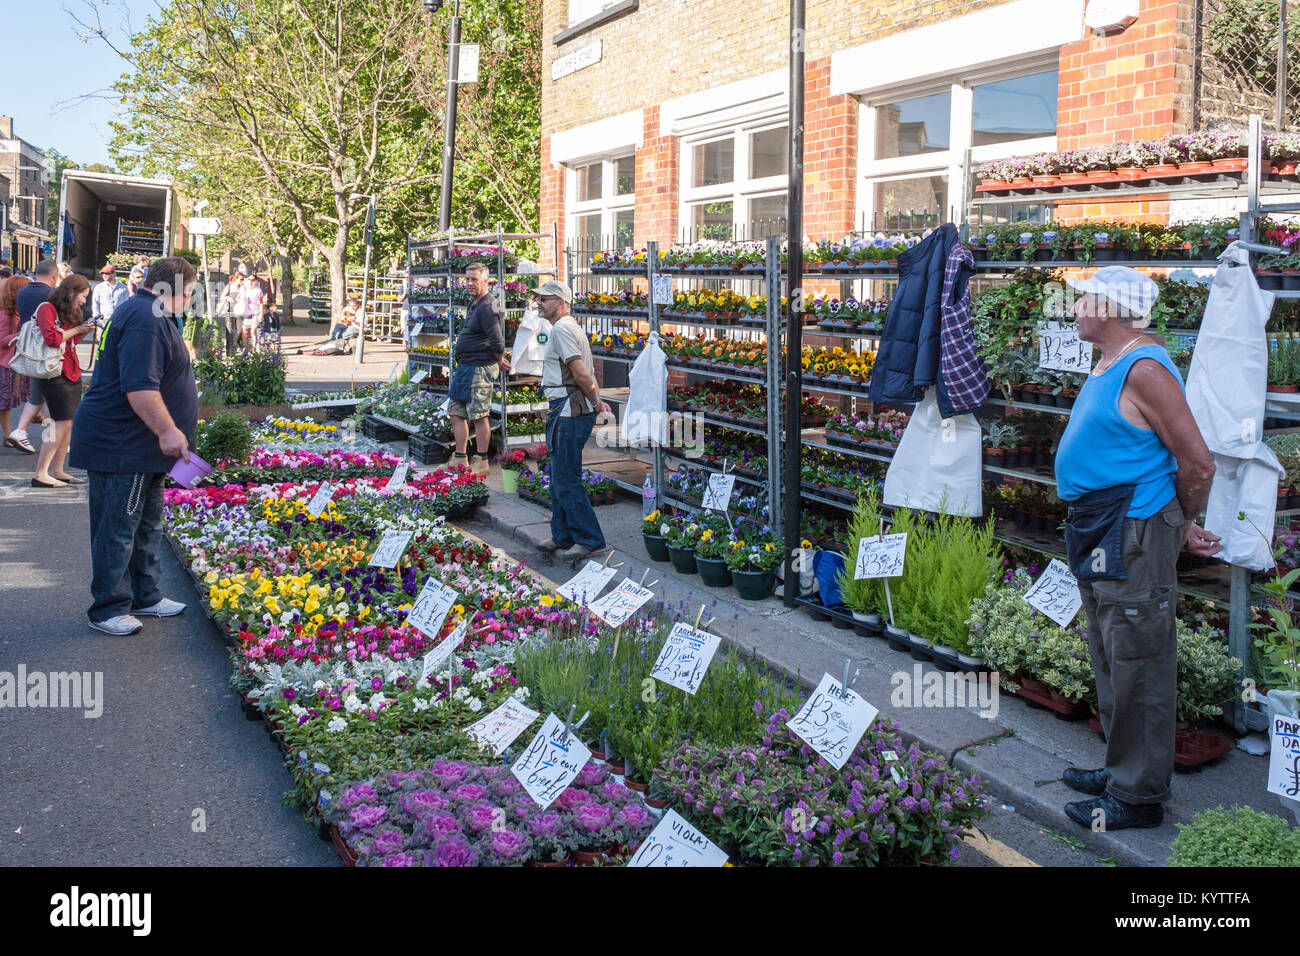 Columbia Road Flower Market stall with market traders, Columbia Rd, London, England, GB, UK Stock Photo